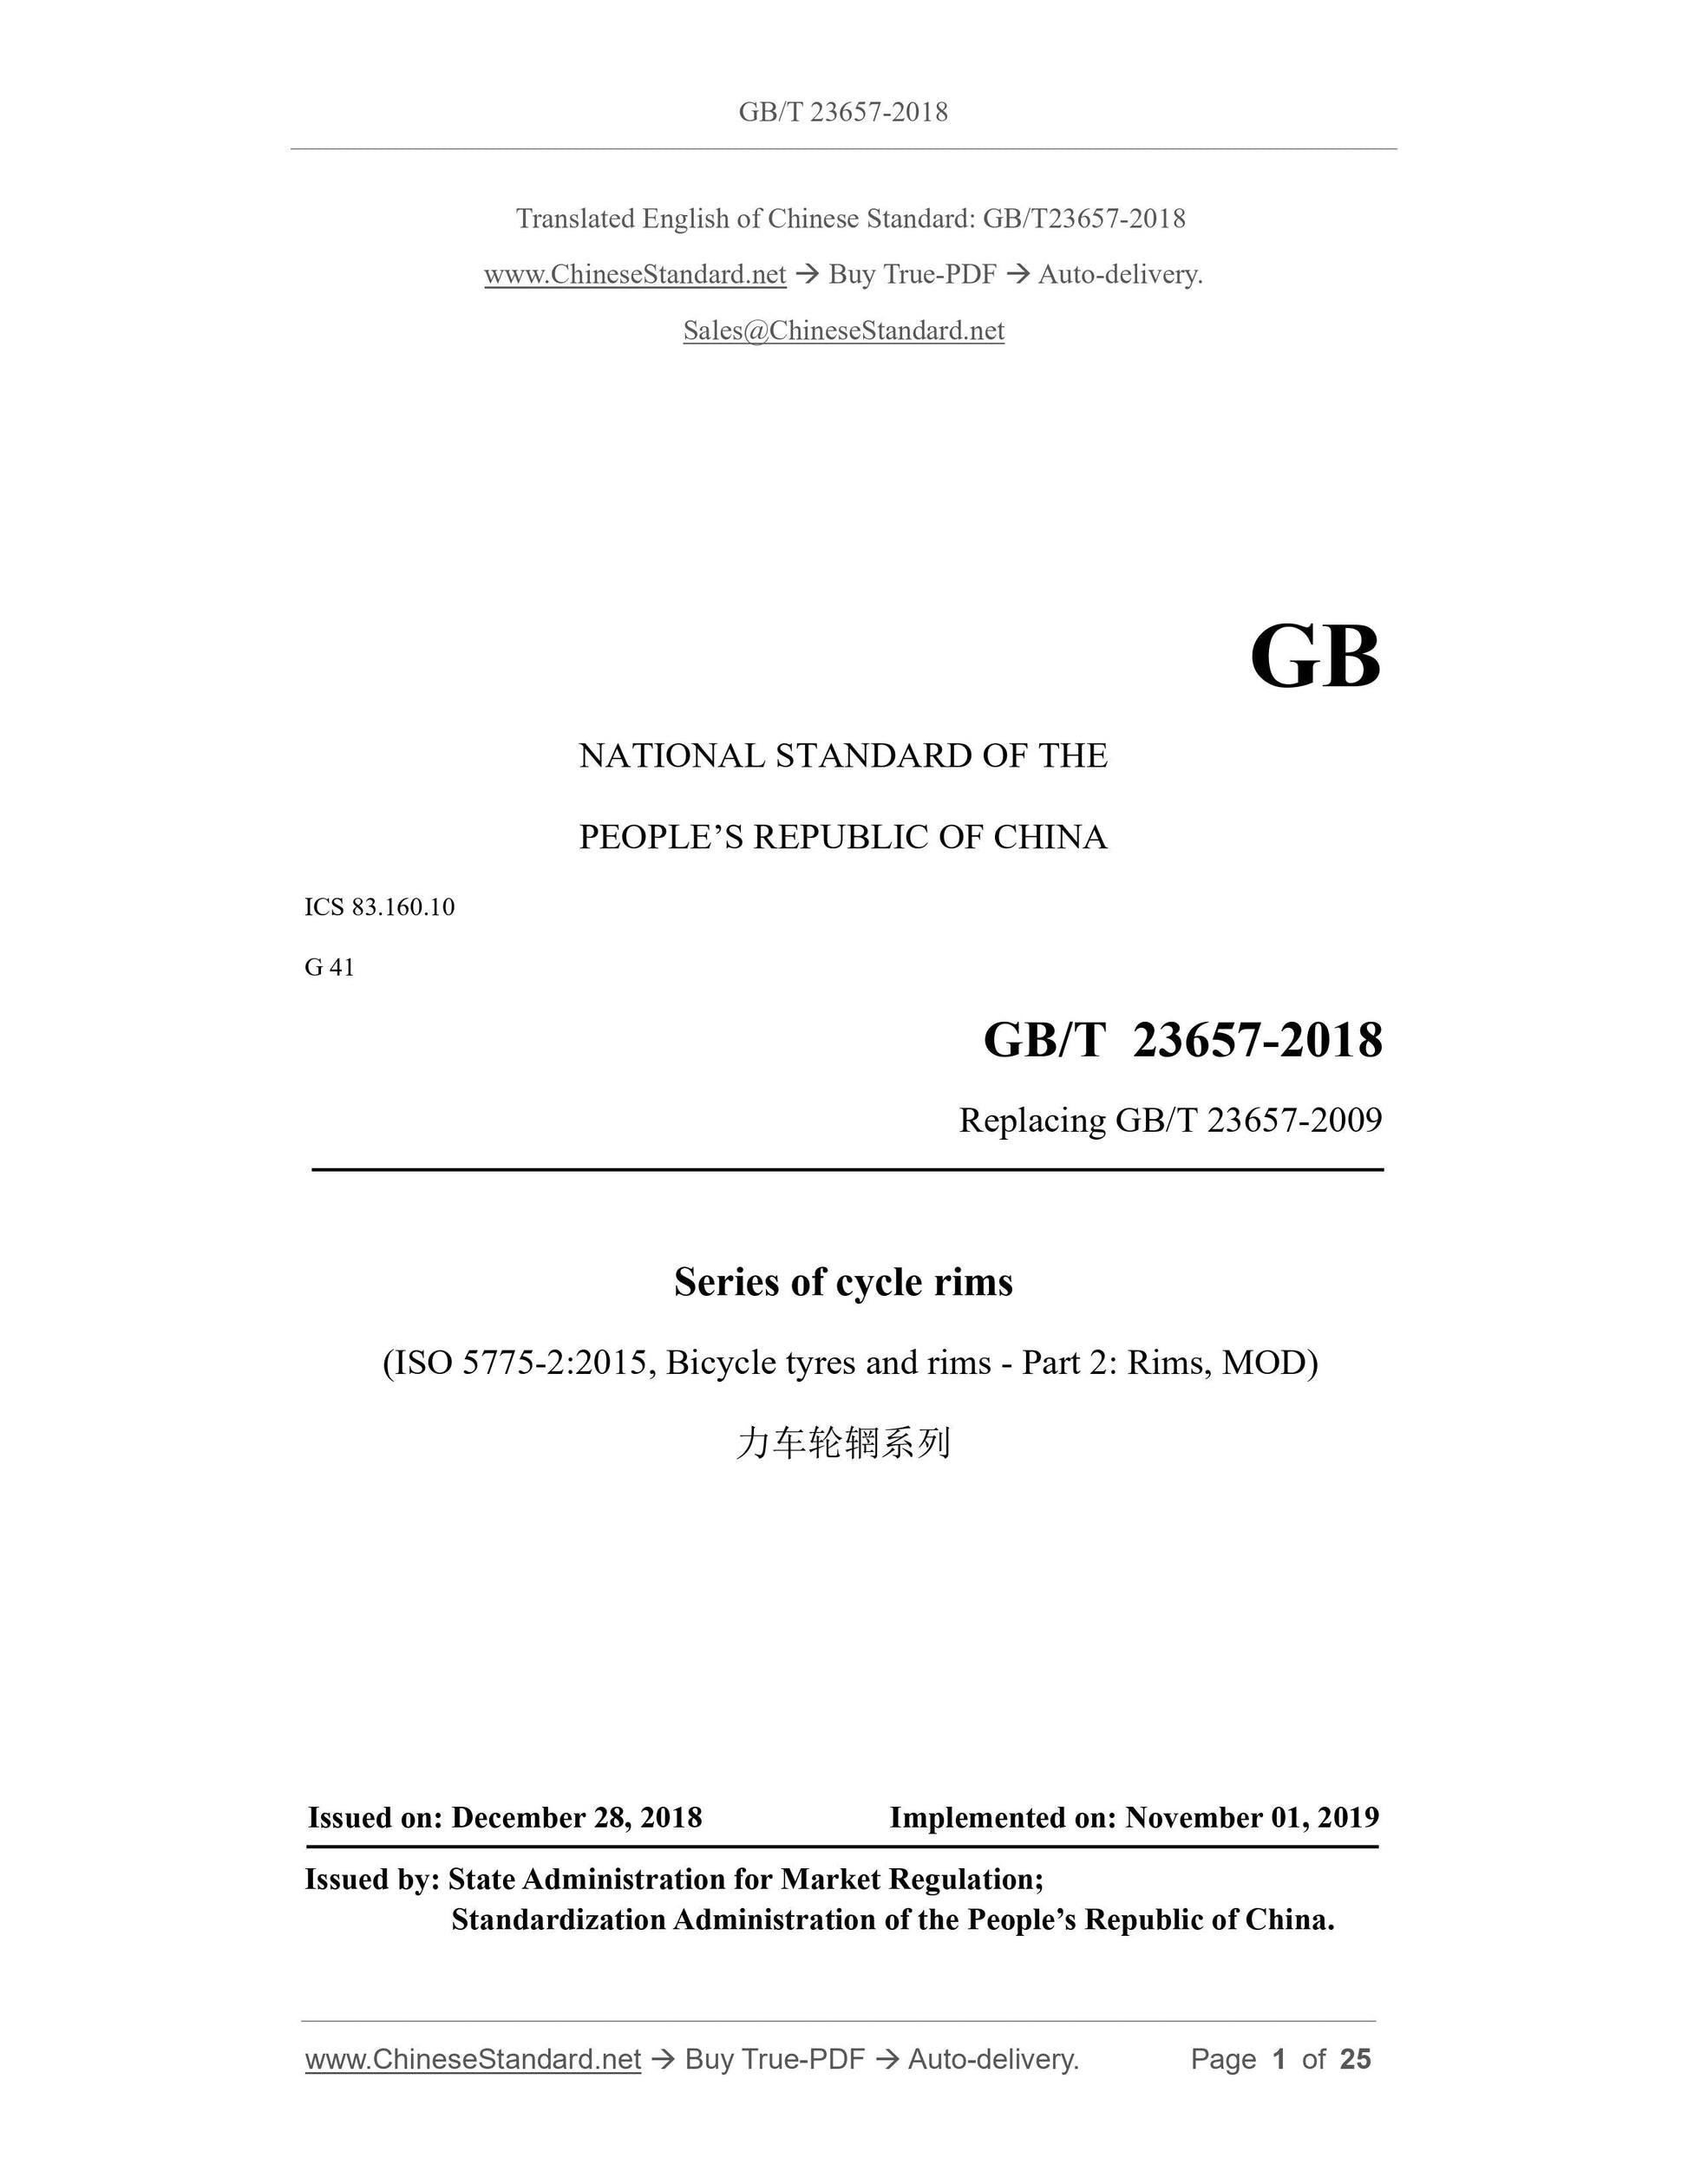 GB/T 23657-2018 Page 1